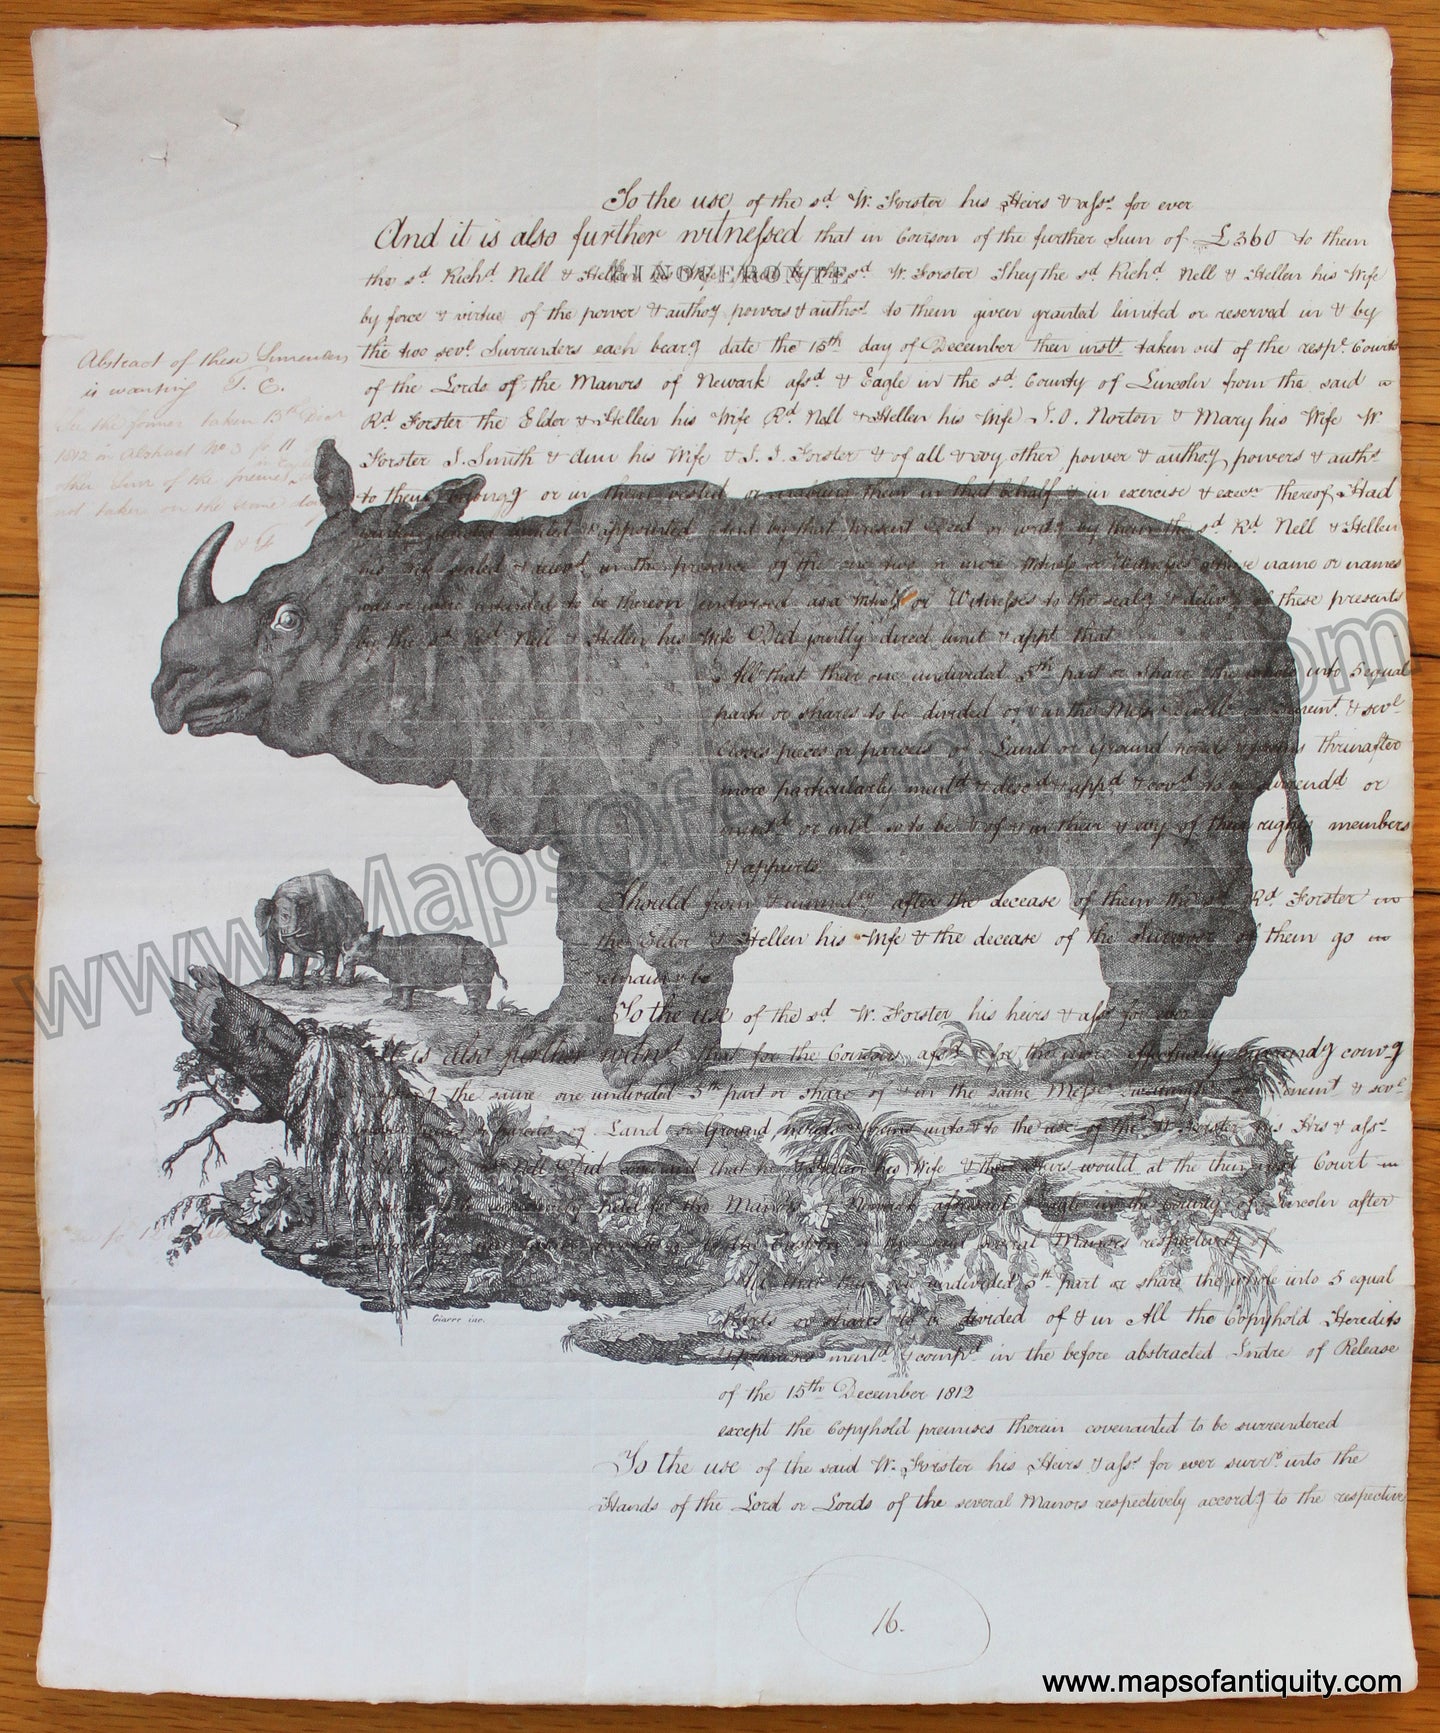 Digitally-Engraved-Specialty-Reproduction-Natural-History-Print-Prints-Rhinoceros-Rhino-Rinoceronte-Reproductions-1800s-19th-century-Maps-of-Antiquity